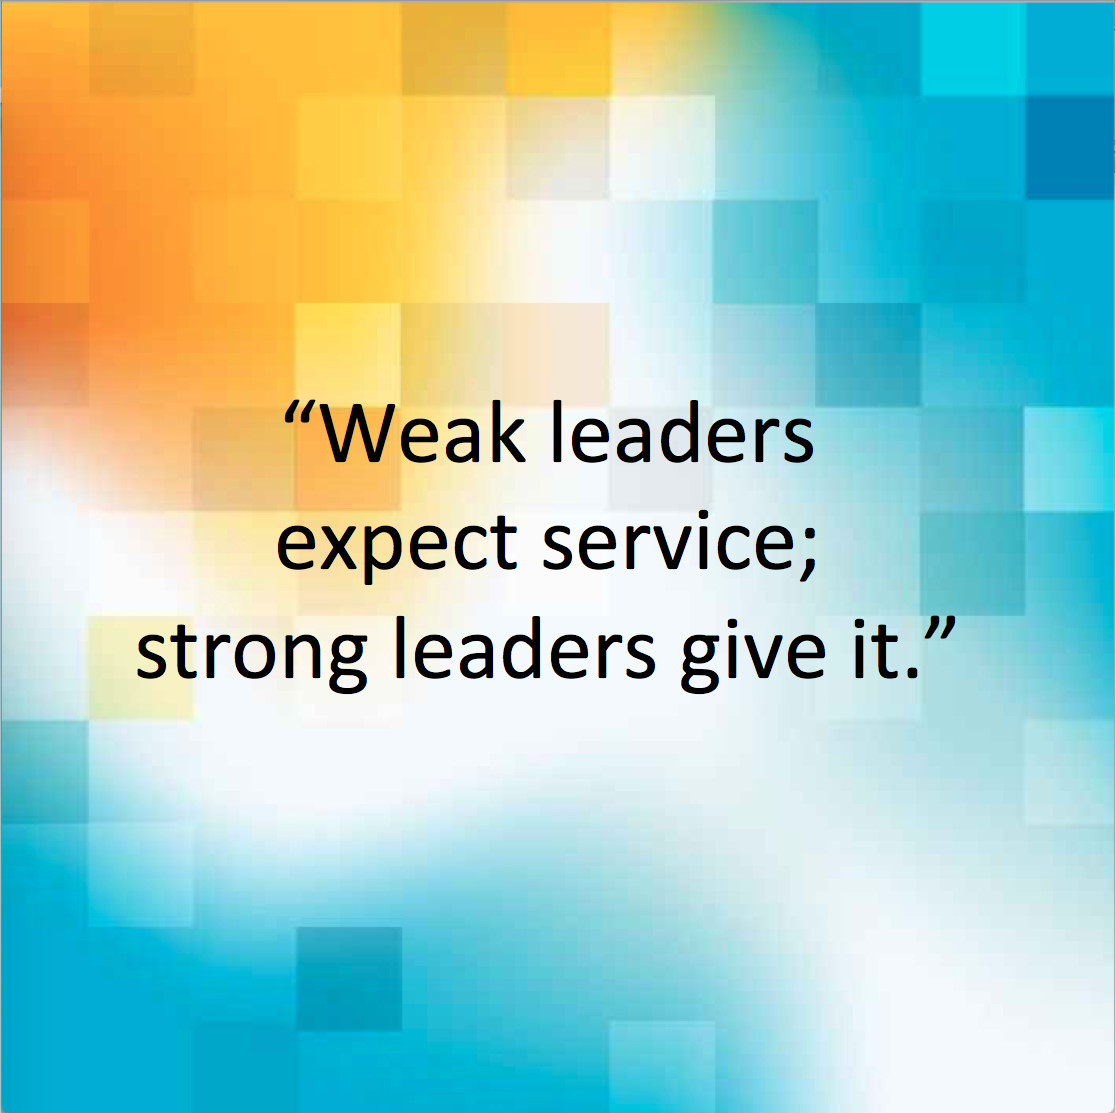 Quotes About Servant Leadership
 Keep on the Right Path through a Servant Leadership Focus